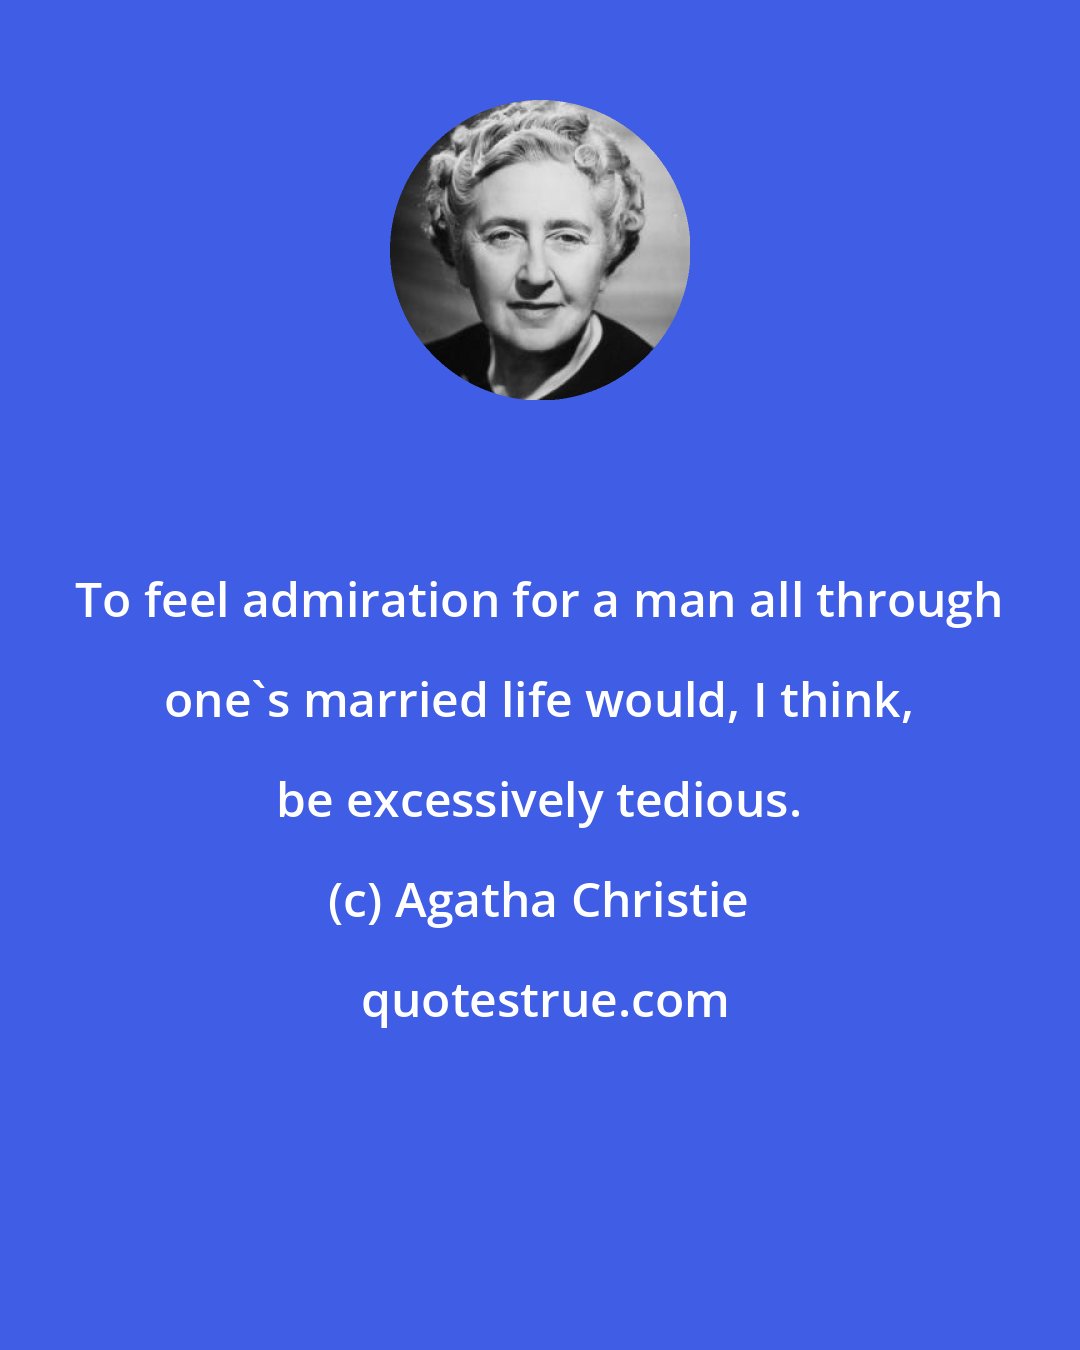 Agatha Christie: To feel admiration for a man all through one's married life would, I think, be excessively tedious.